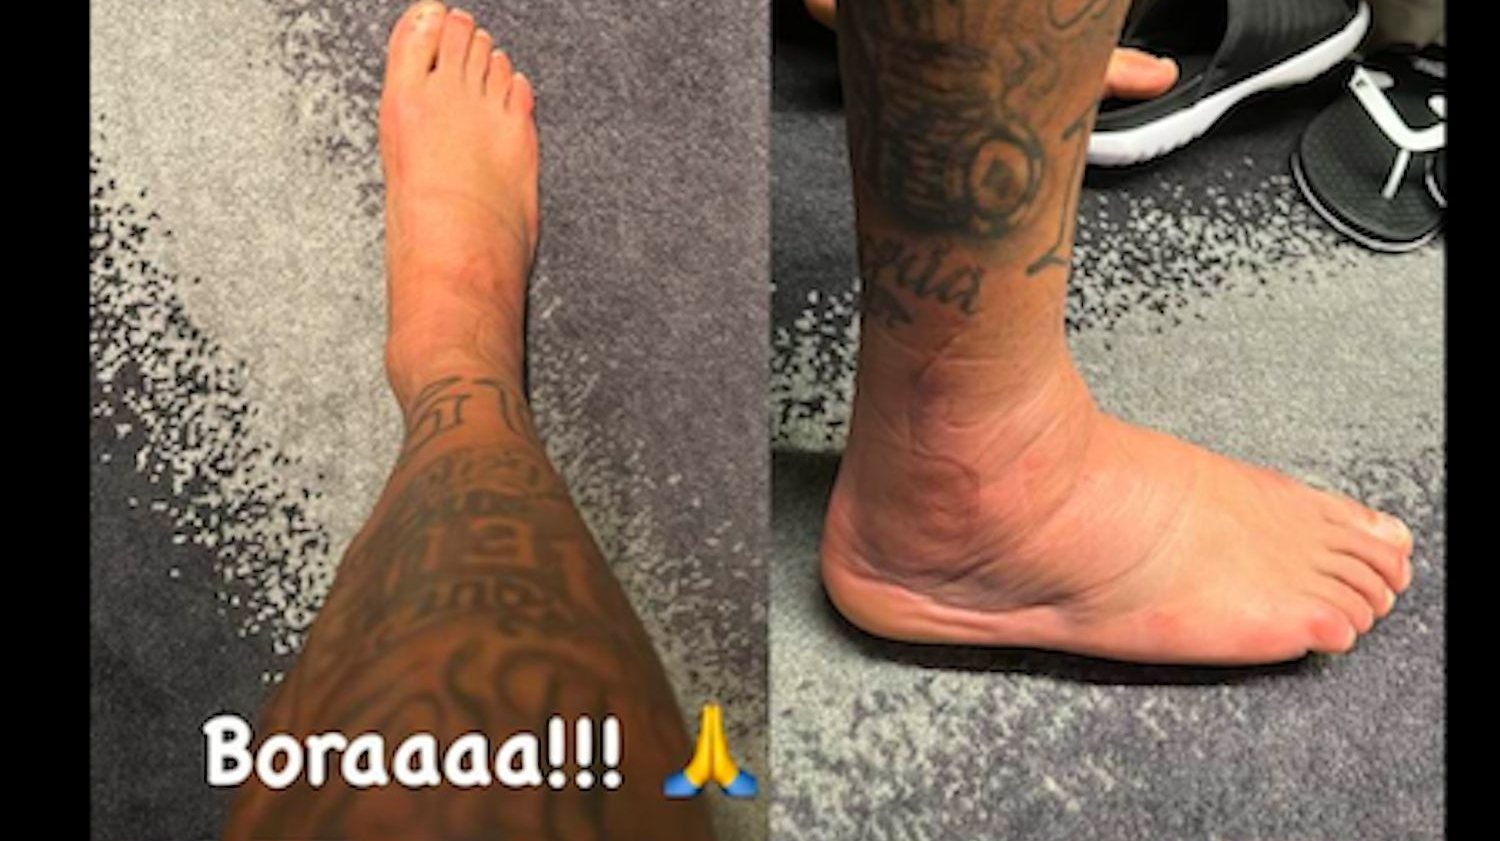 Neymar shares an image of an injured ankle that continues to worry Brazil